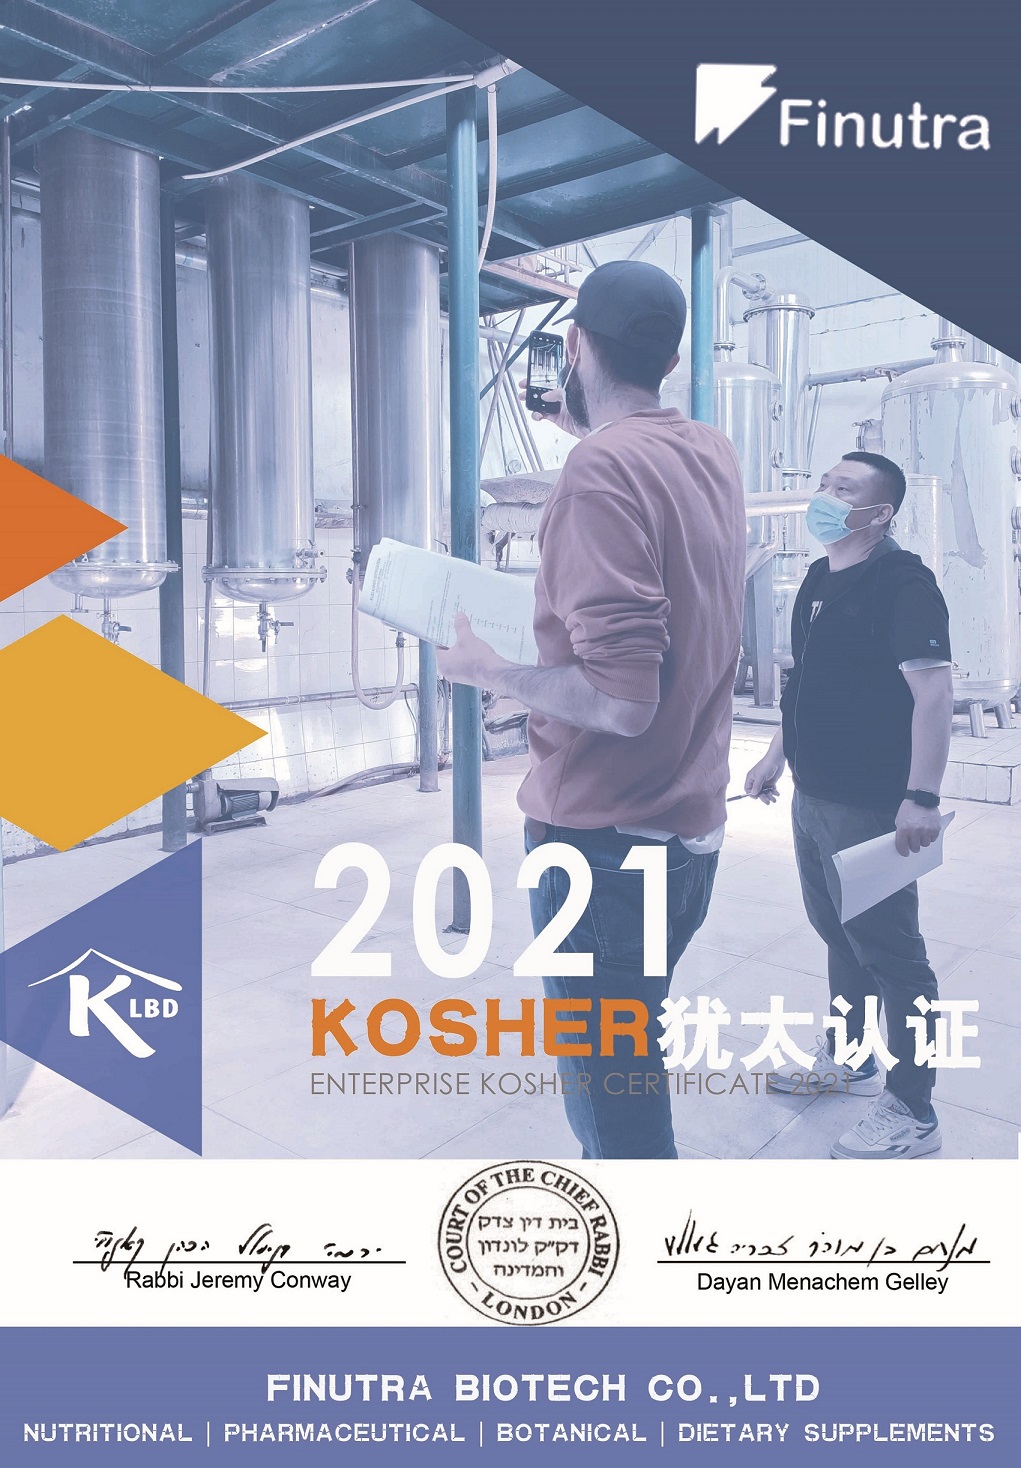 Finutra has successfully passed the renewal certificate of KOSHER in 2021.